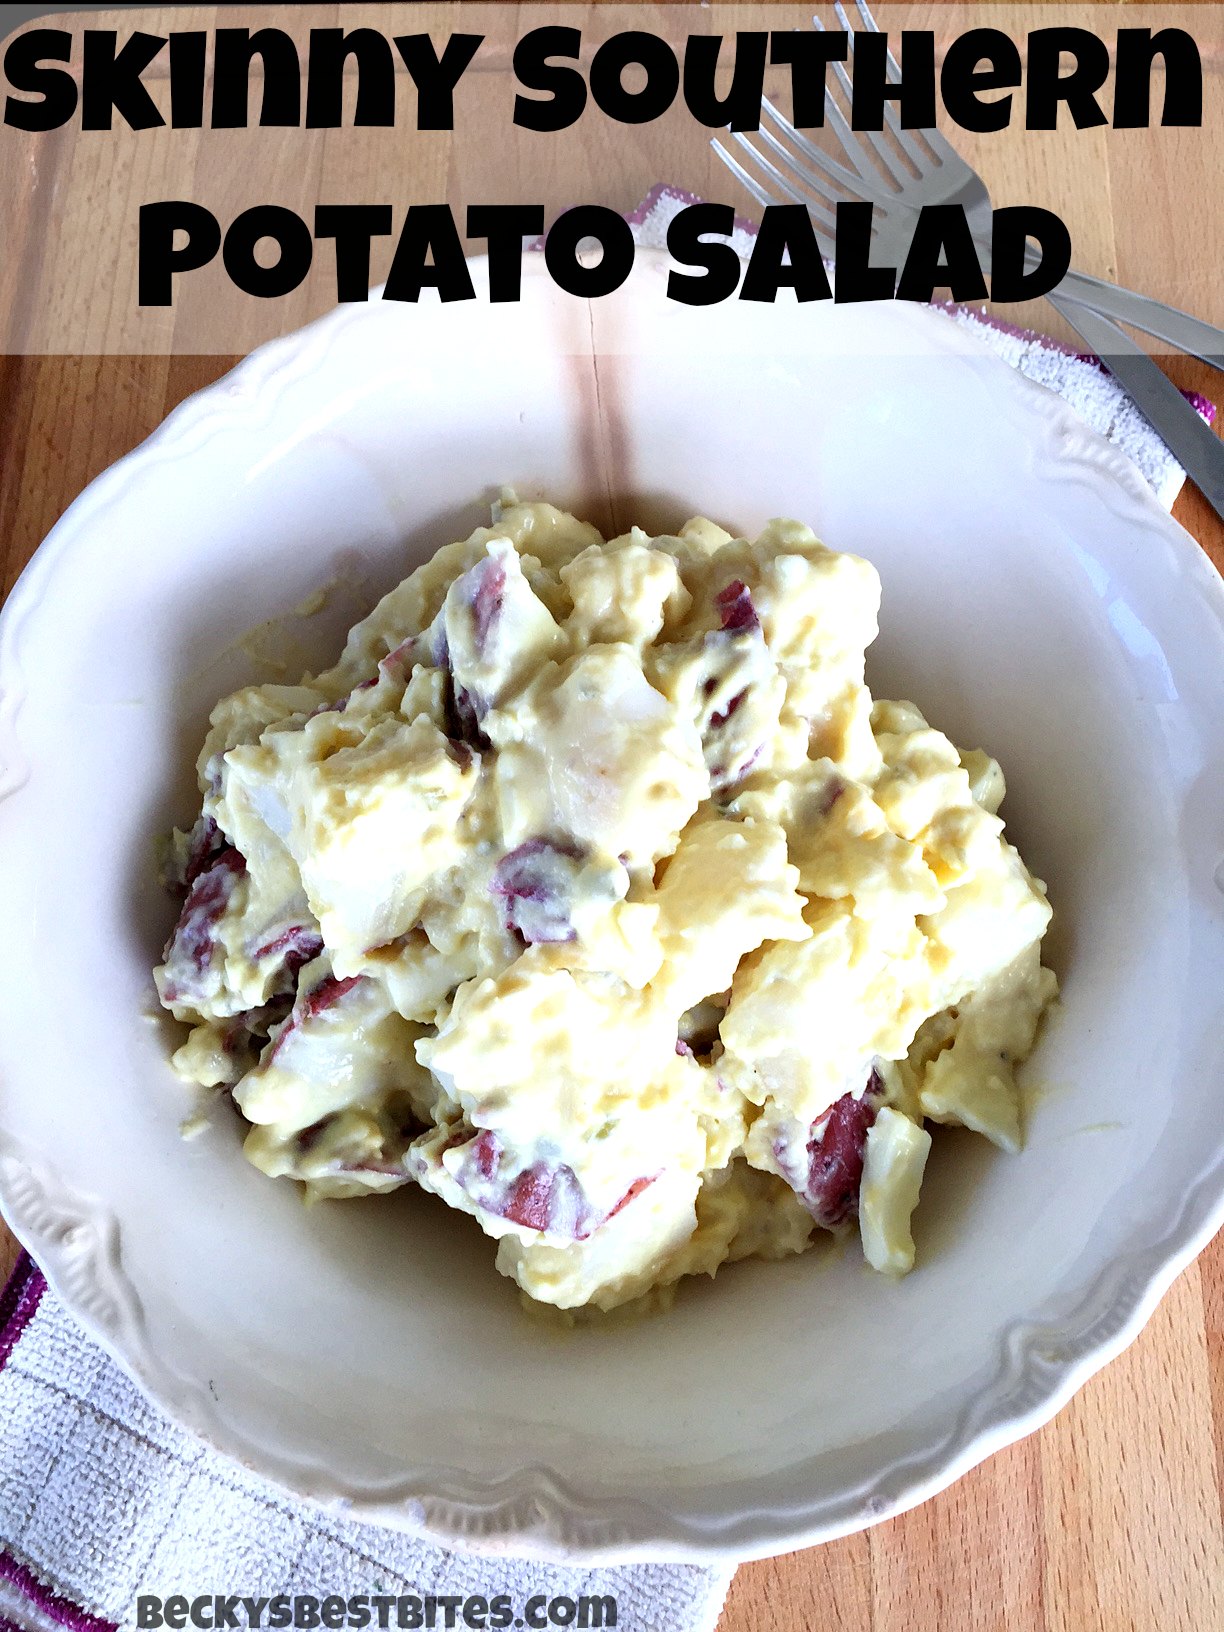 This Skinny Southern Potato Salad Recipe combines all the flavors of the traditional favorite with a more healthful twist. Greek yogurt is the secret ingredient that pulls it all together. | Becky's Best Bites #healthyrecipe #recipemakeover